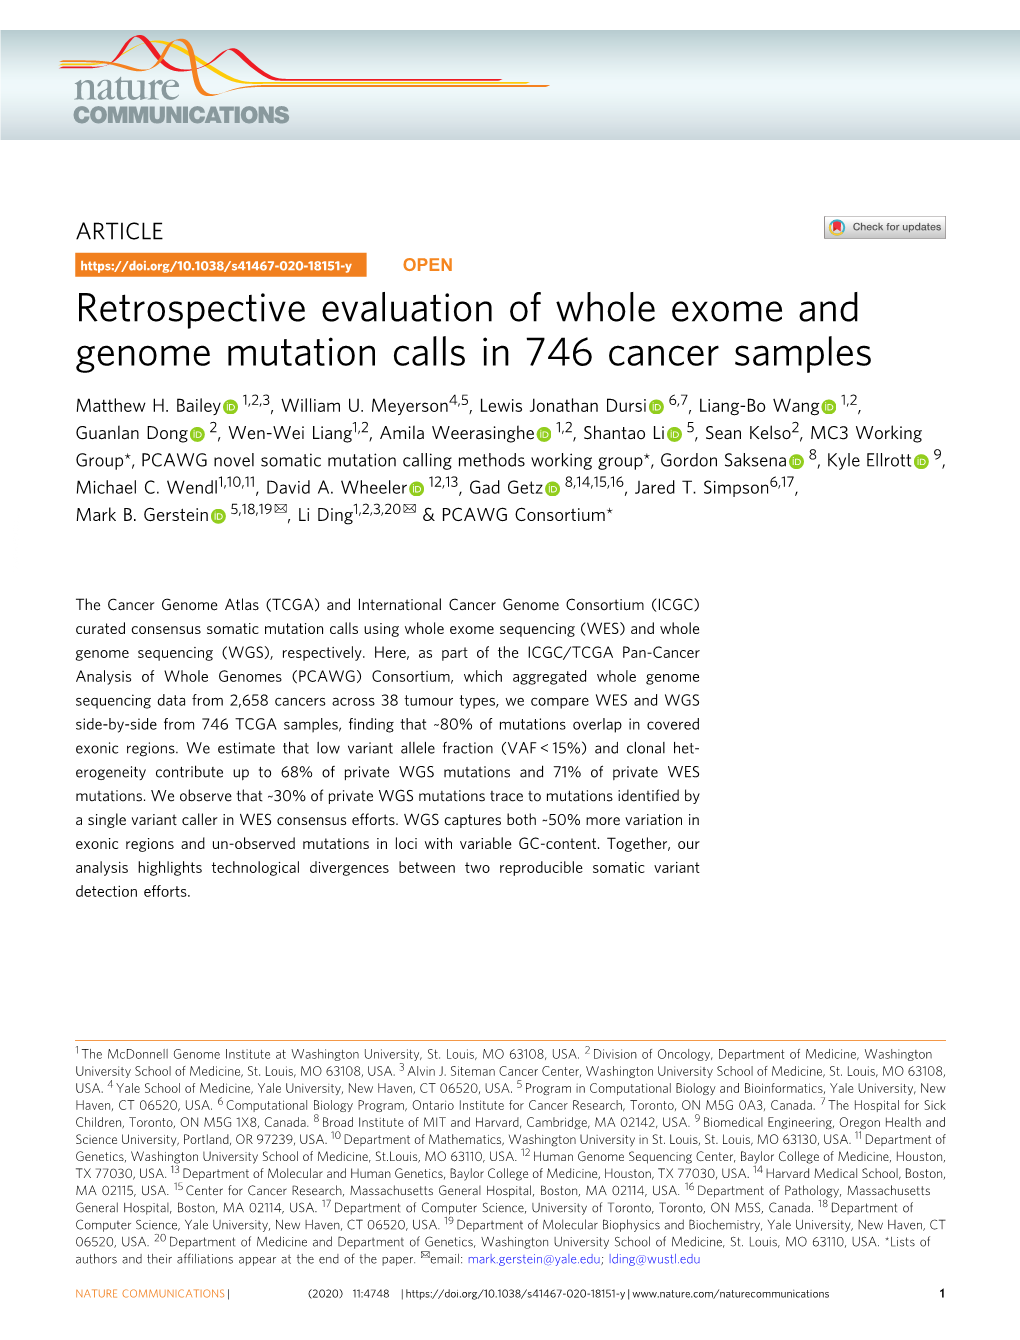 Retrospective Evaluation of Whole Exome and Genome Mutation Calls in 746 Cancer Samples